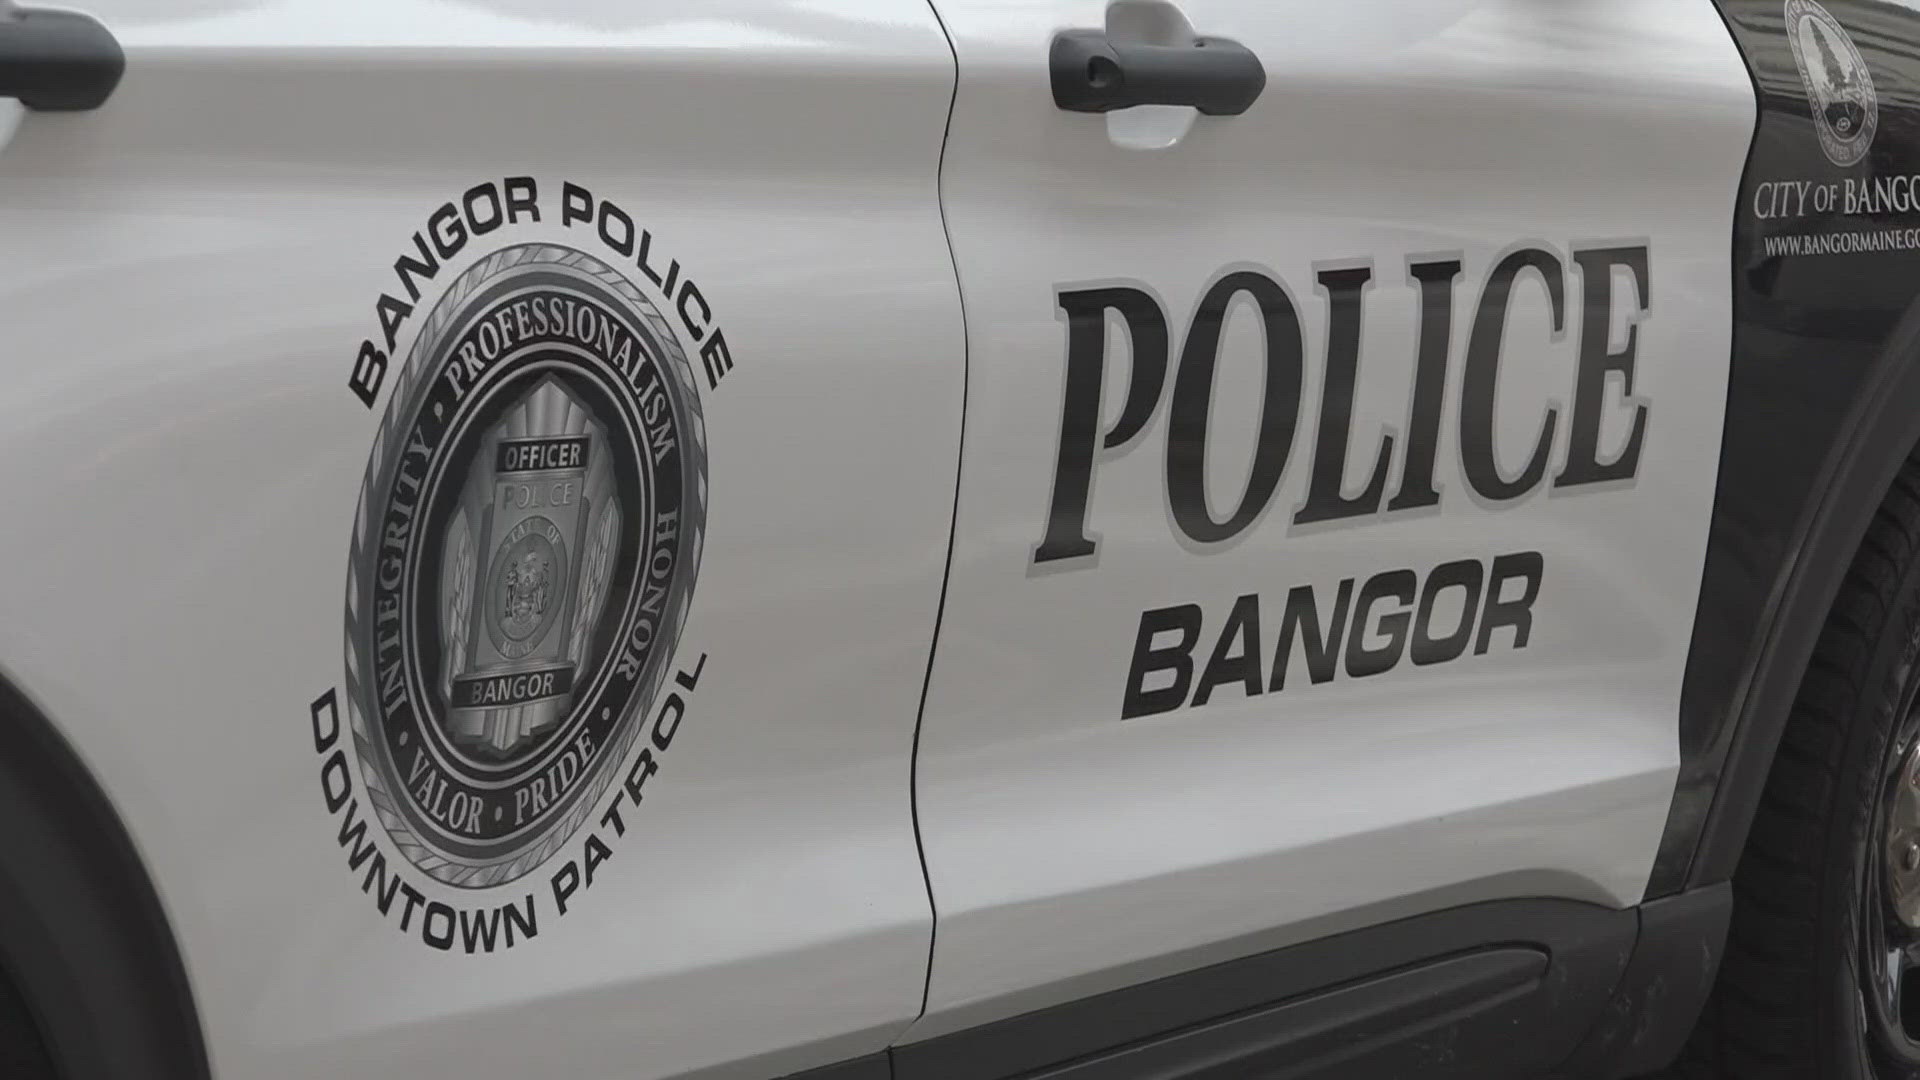 The Bangor Police Department reintroduced its walking beat officer downtown at the end of May after demand from local businesses.